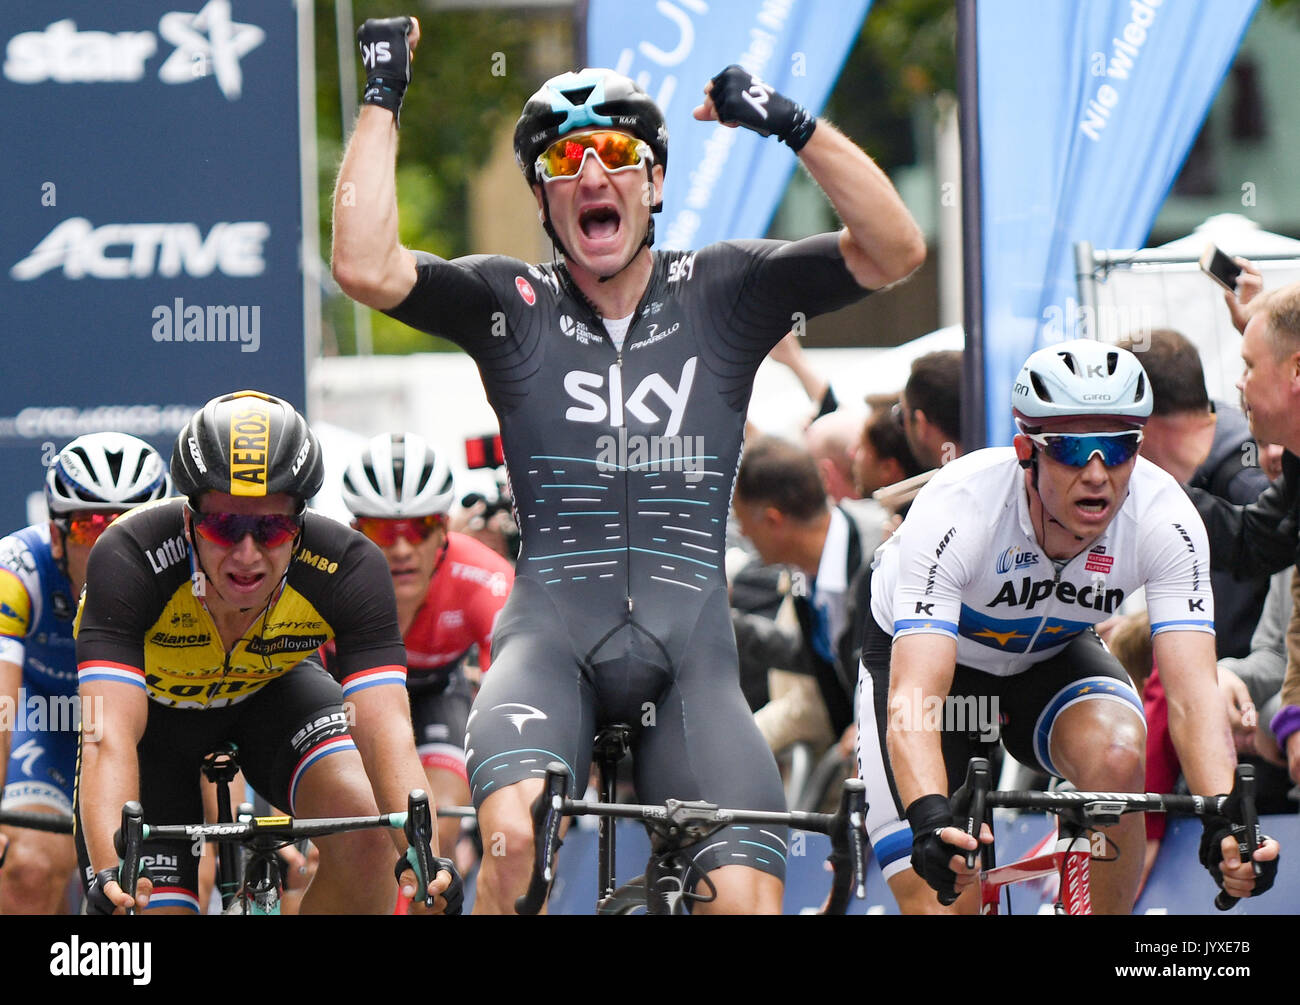 Hamburg, Germany. 20th Aug, 2017. Elia Viviani (c) of Italy celebrates his victory at the finish of the Euro Eyes Cyclassics in Hamburg, Germany, 20 August 2017. Dylan Groenewegen of the Netherlands (L) came third. Photo: Axel Heimken/dpa/Alamy Live News Stock Photo